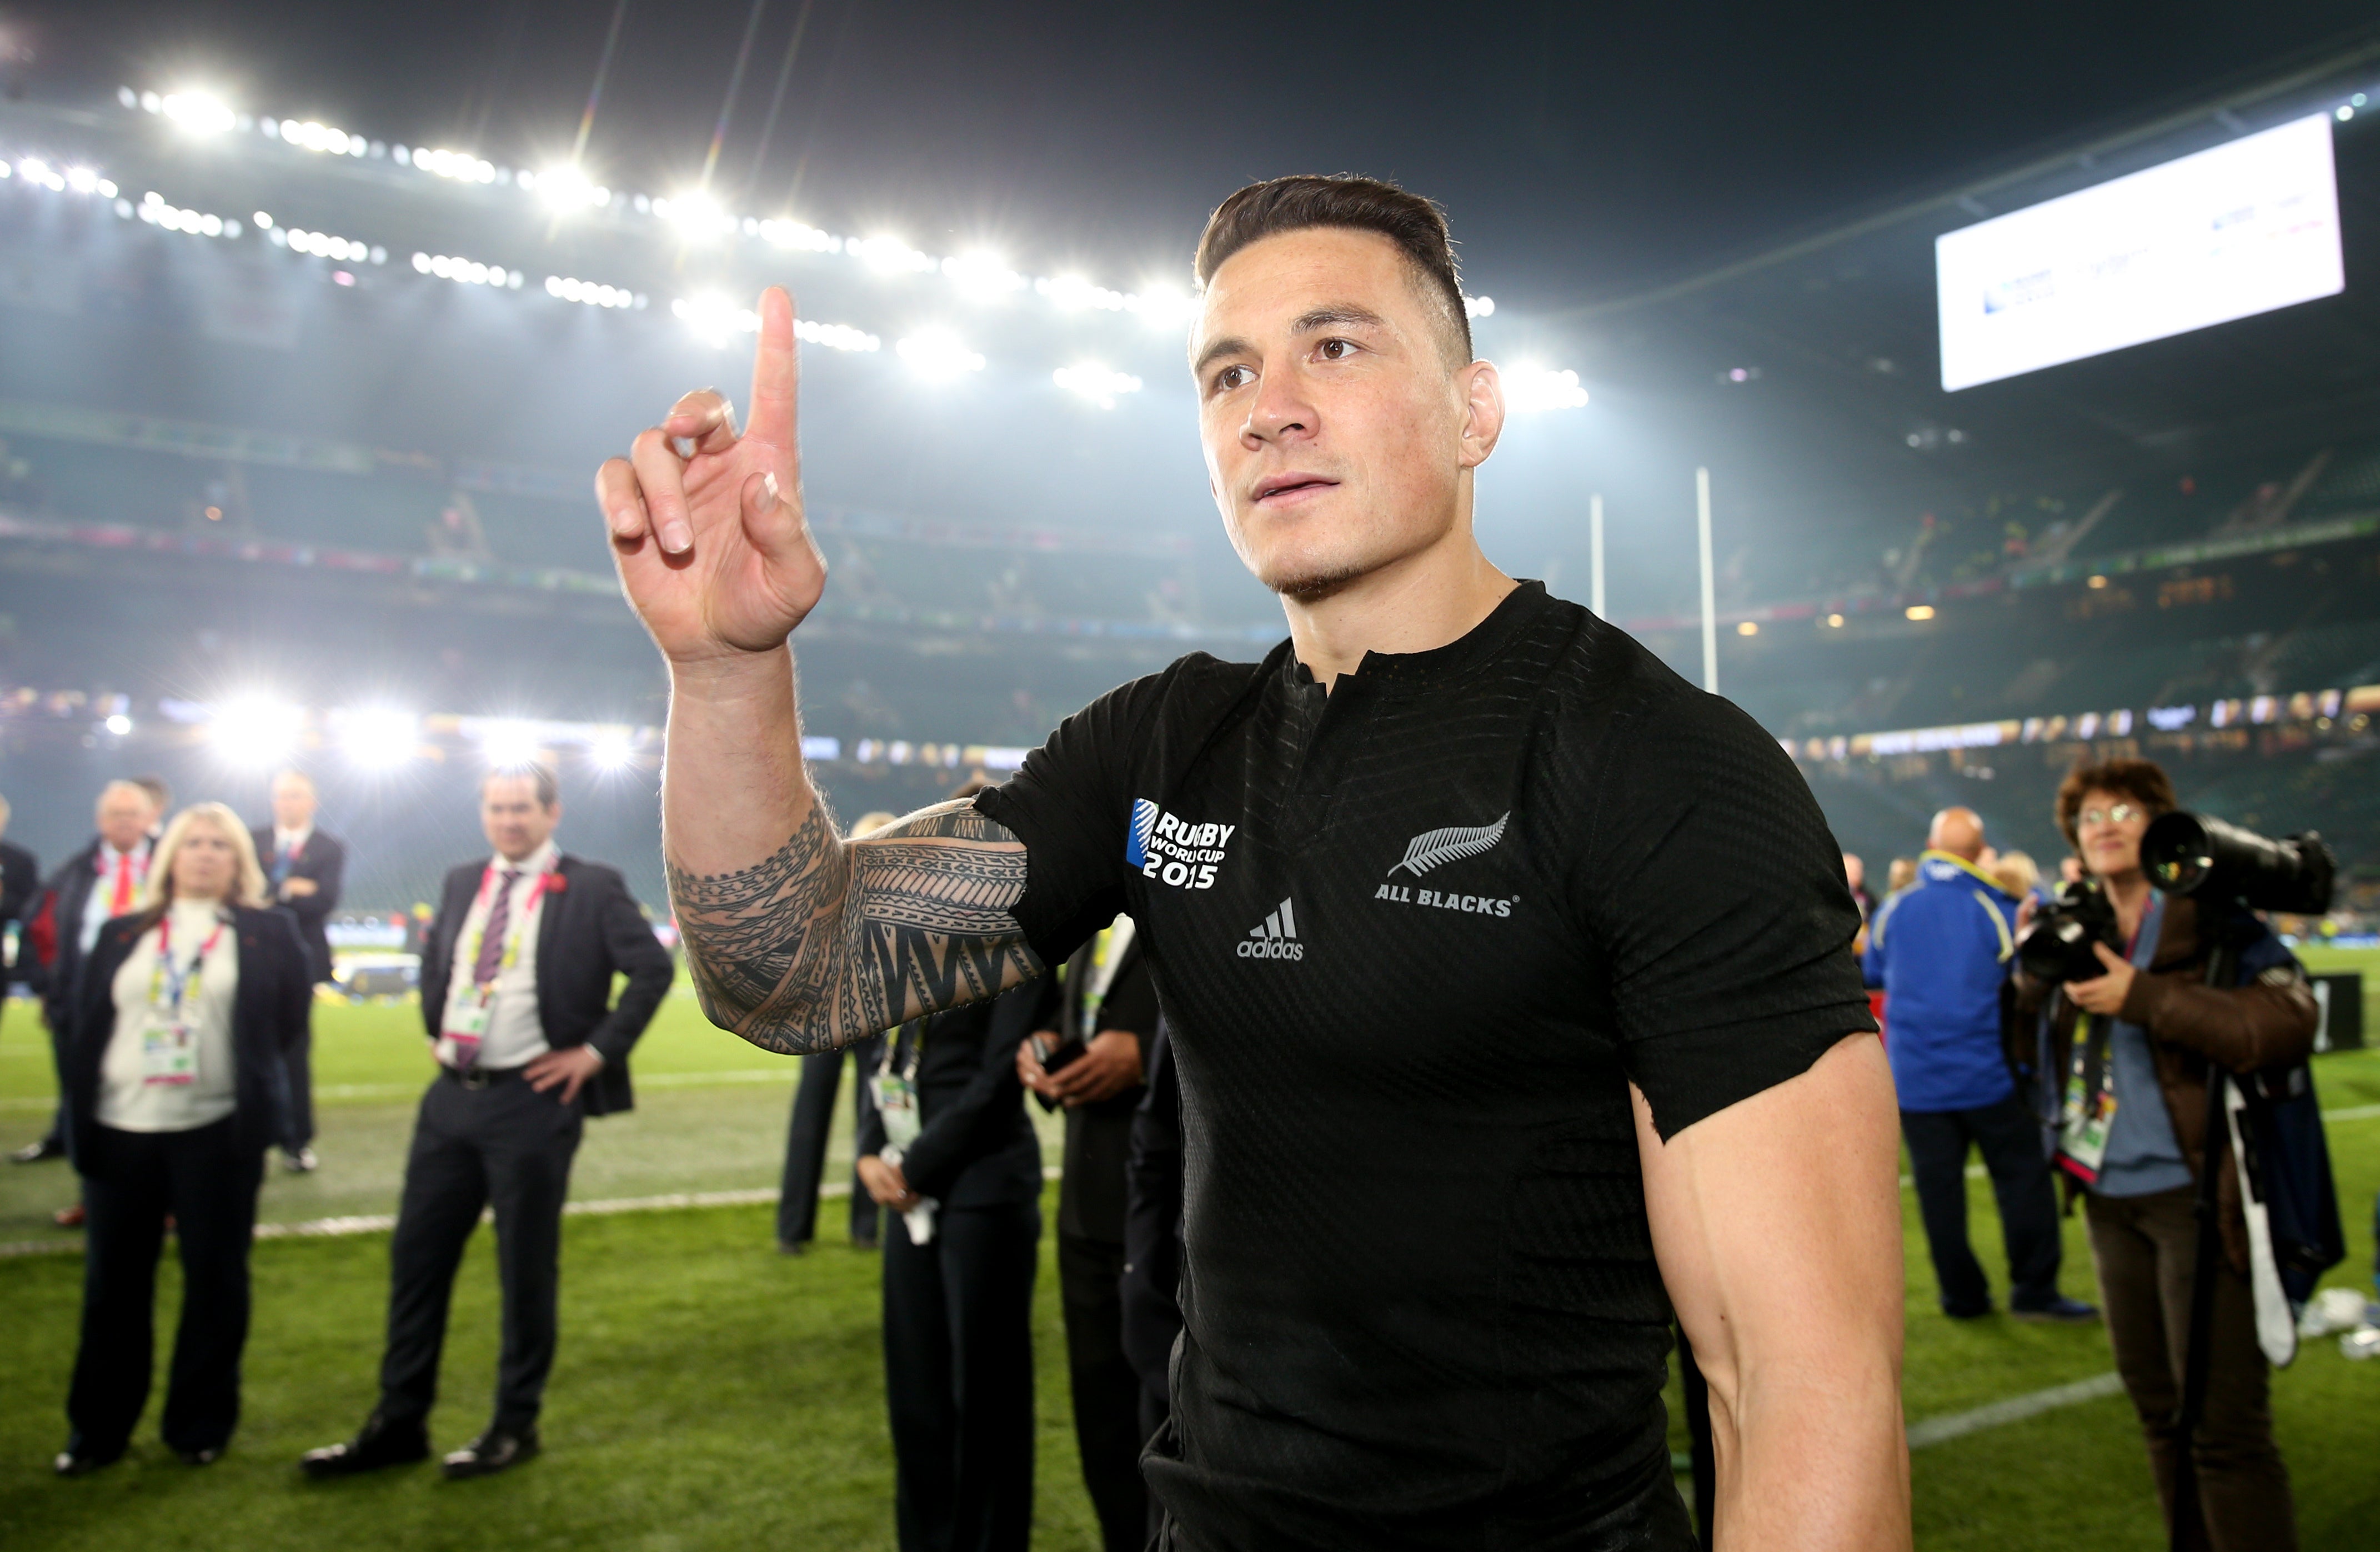 Sonny Bill Williams won back-to-back World Cups with the All Blacks